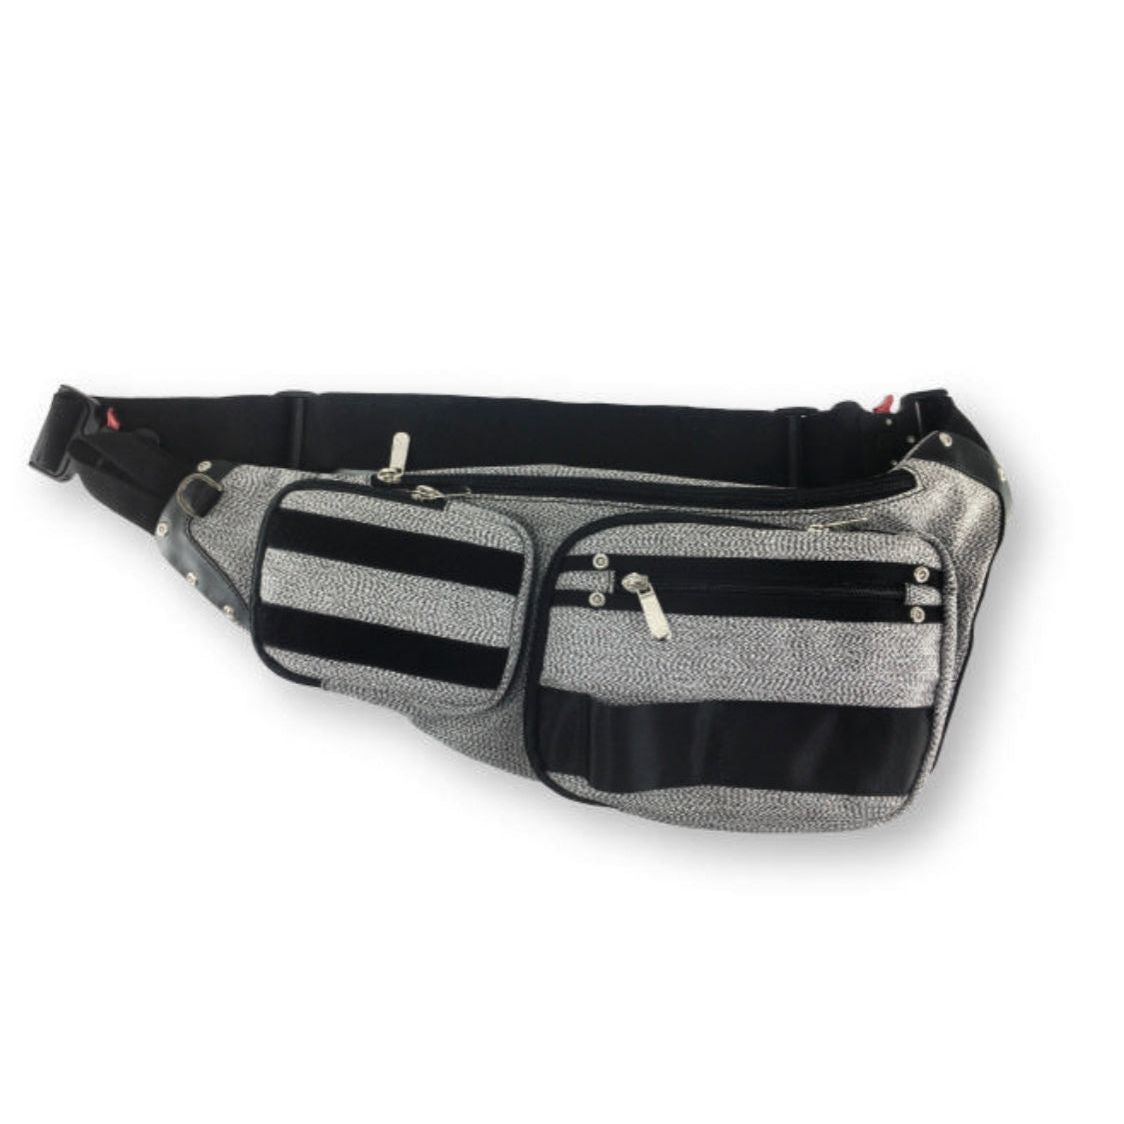 CEST® Fanny Pack cut protection stab protection